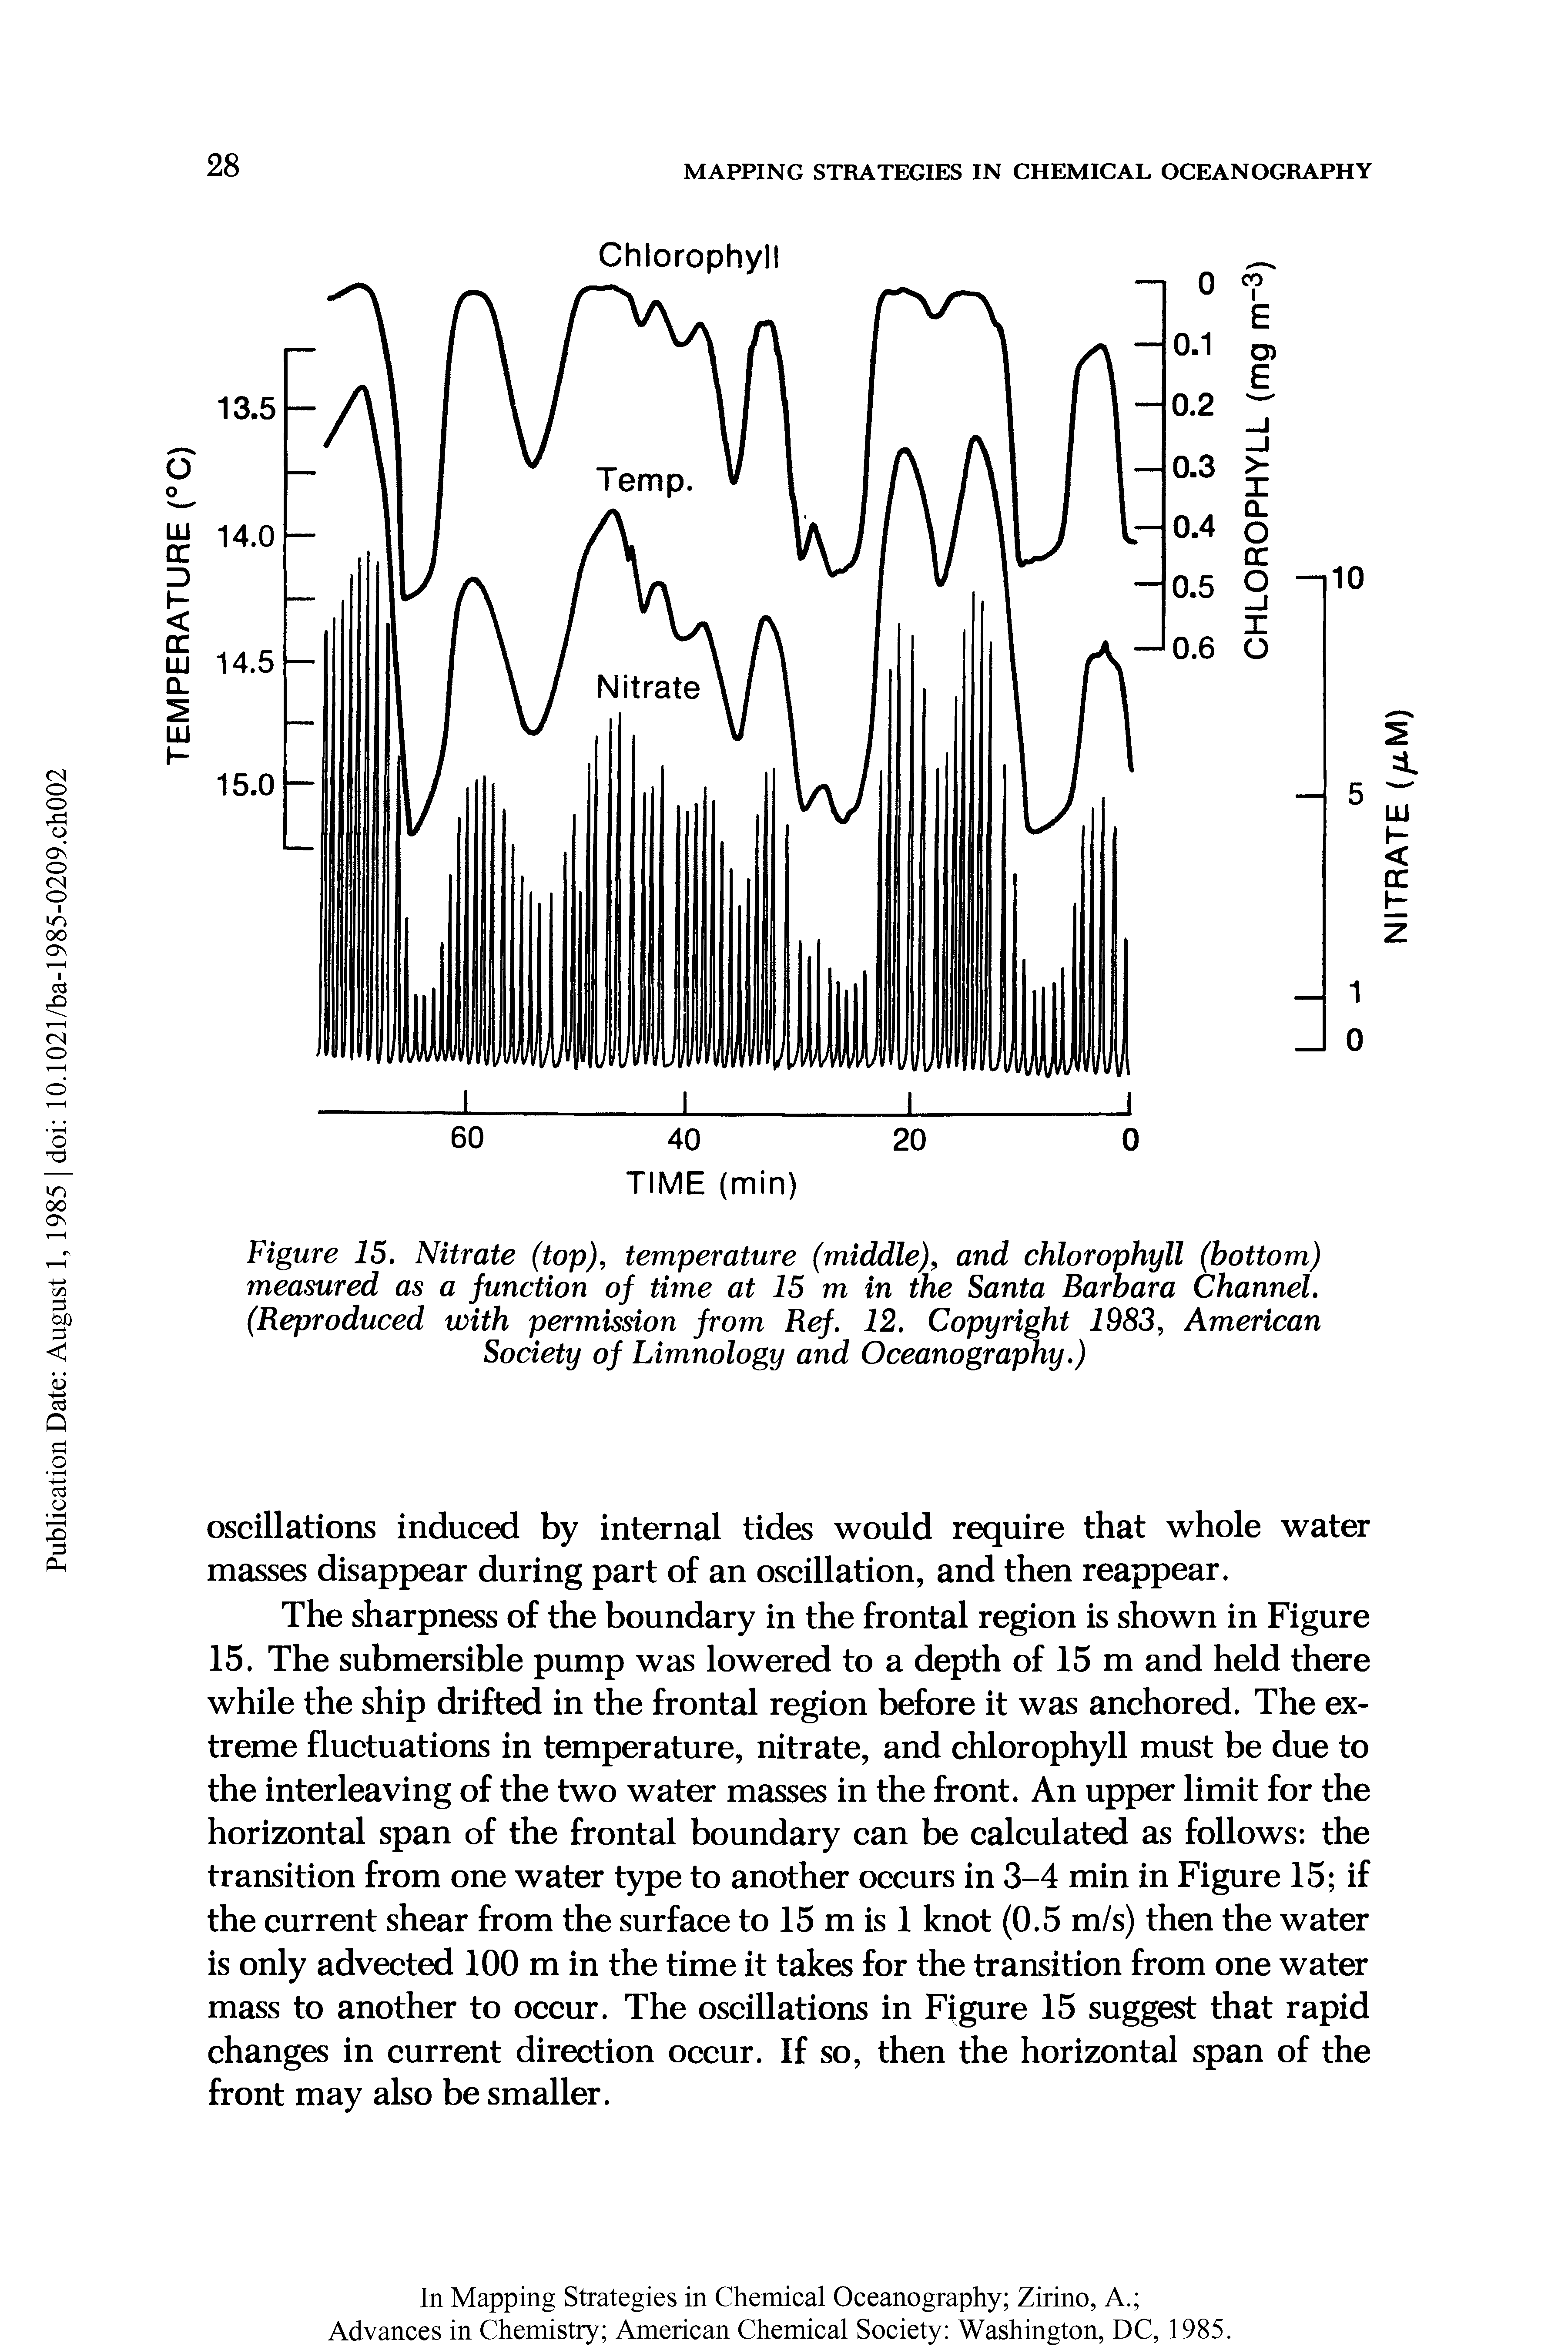 Figure 15. Nitrate (top), temperature (middle), and chlorophyll (bottom) measured as a function of time at 15 m in the Santa Barbara Channel. (Reproduced with permission from Ref. 12. Copyright 1983, American Society of Limnology and Oceanography.)...